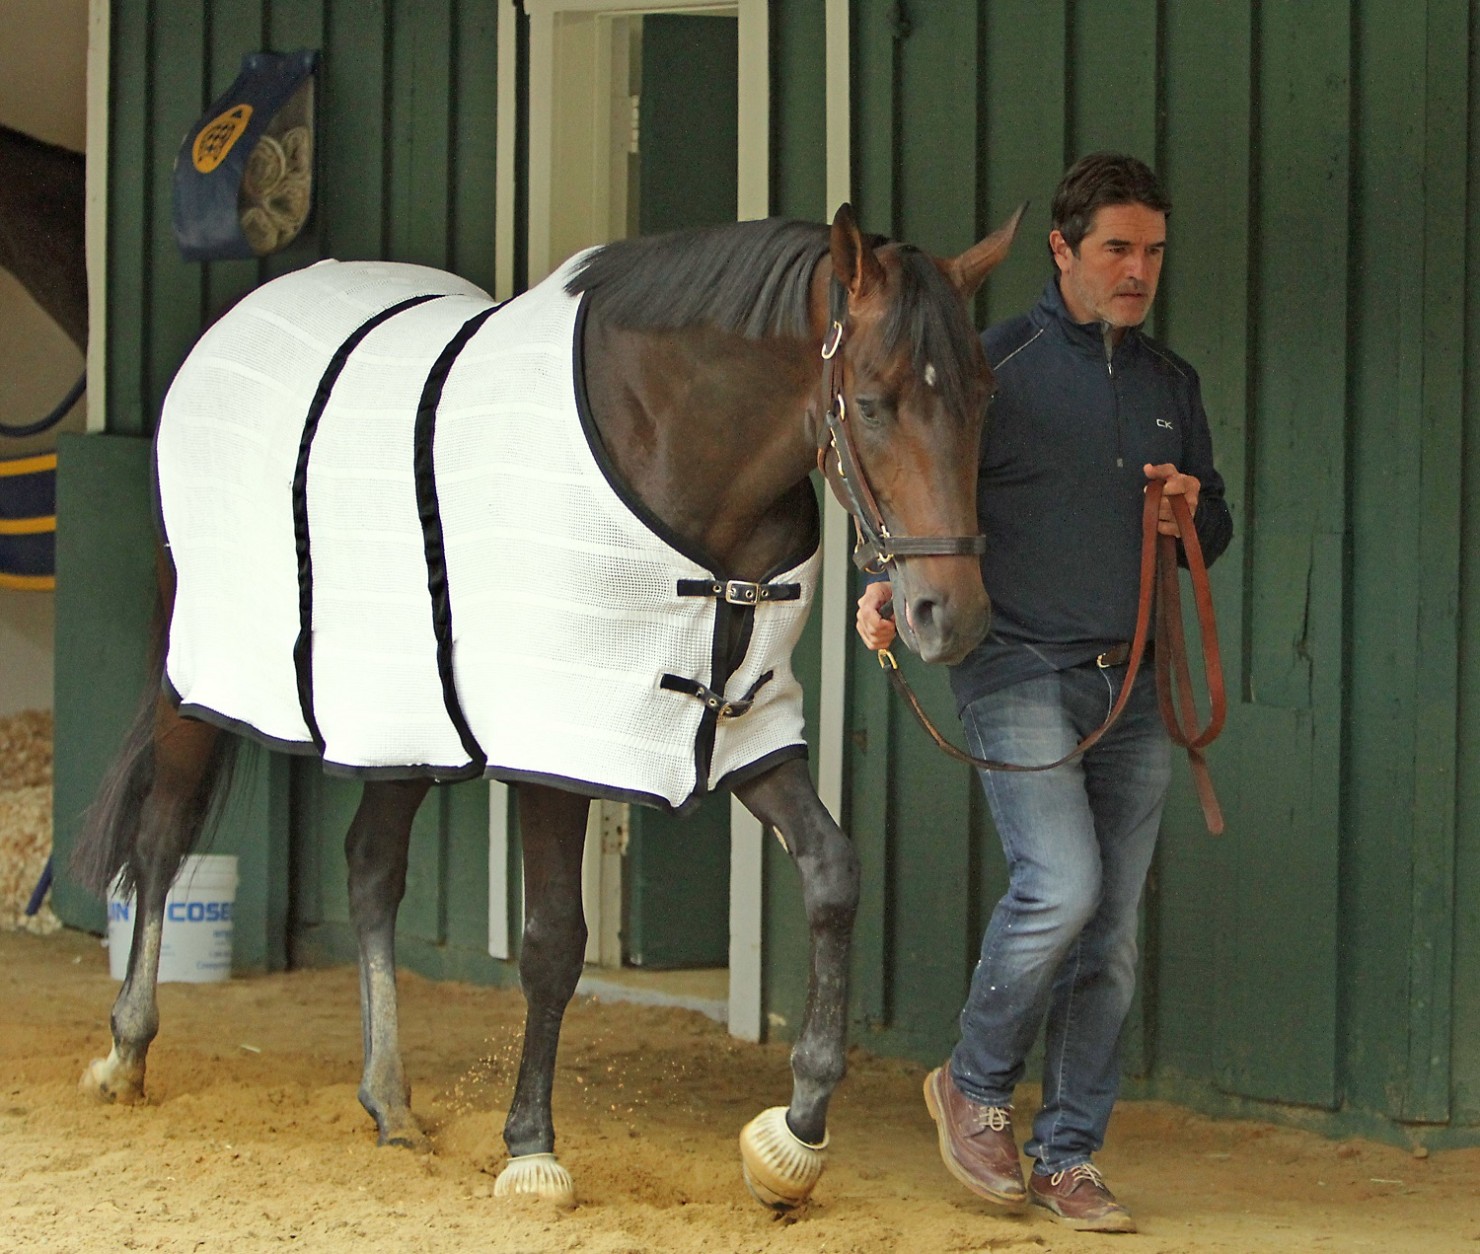 Trainer Keith Desormeaux walks Preakness Stakes hopeful Exaggerator in the stakes barn at Pimlico Race Course Wednesday, May 18, 2016,  in Baltimore following a morning jog. The 141st Preakness Stakes is scheduled for Saturday, May 21. (AP Photo/Garry Jones)